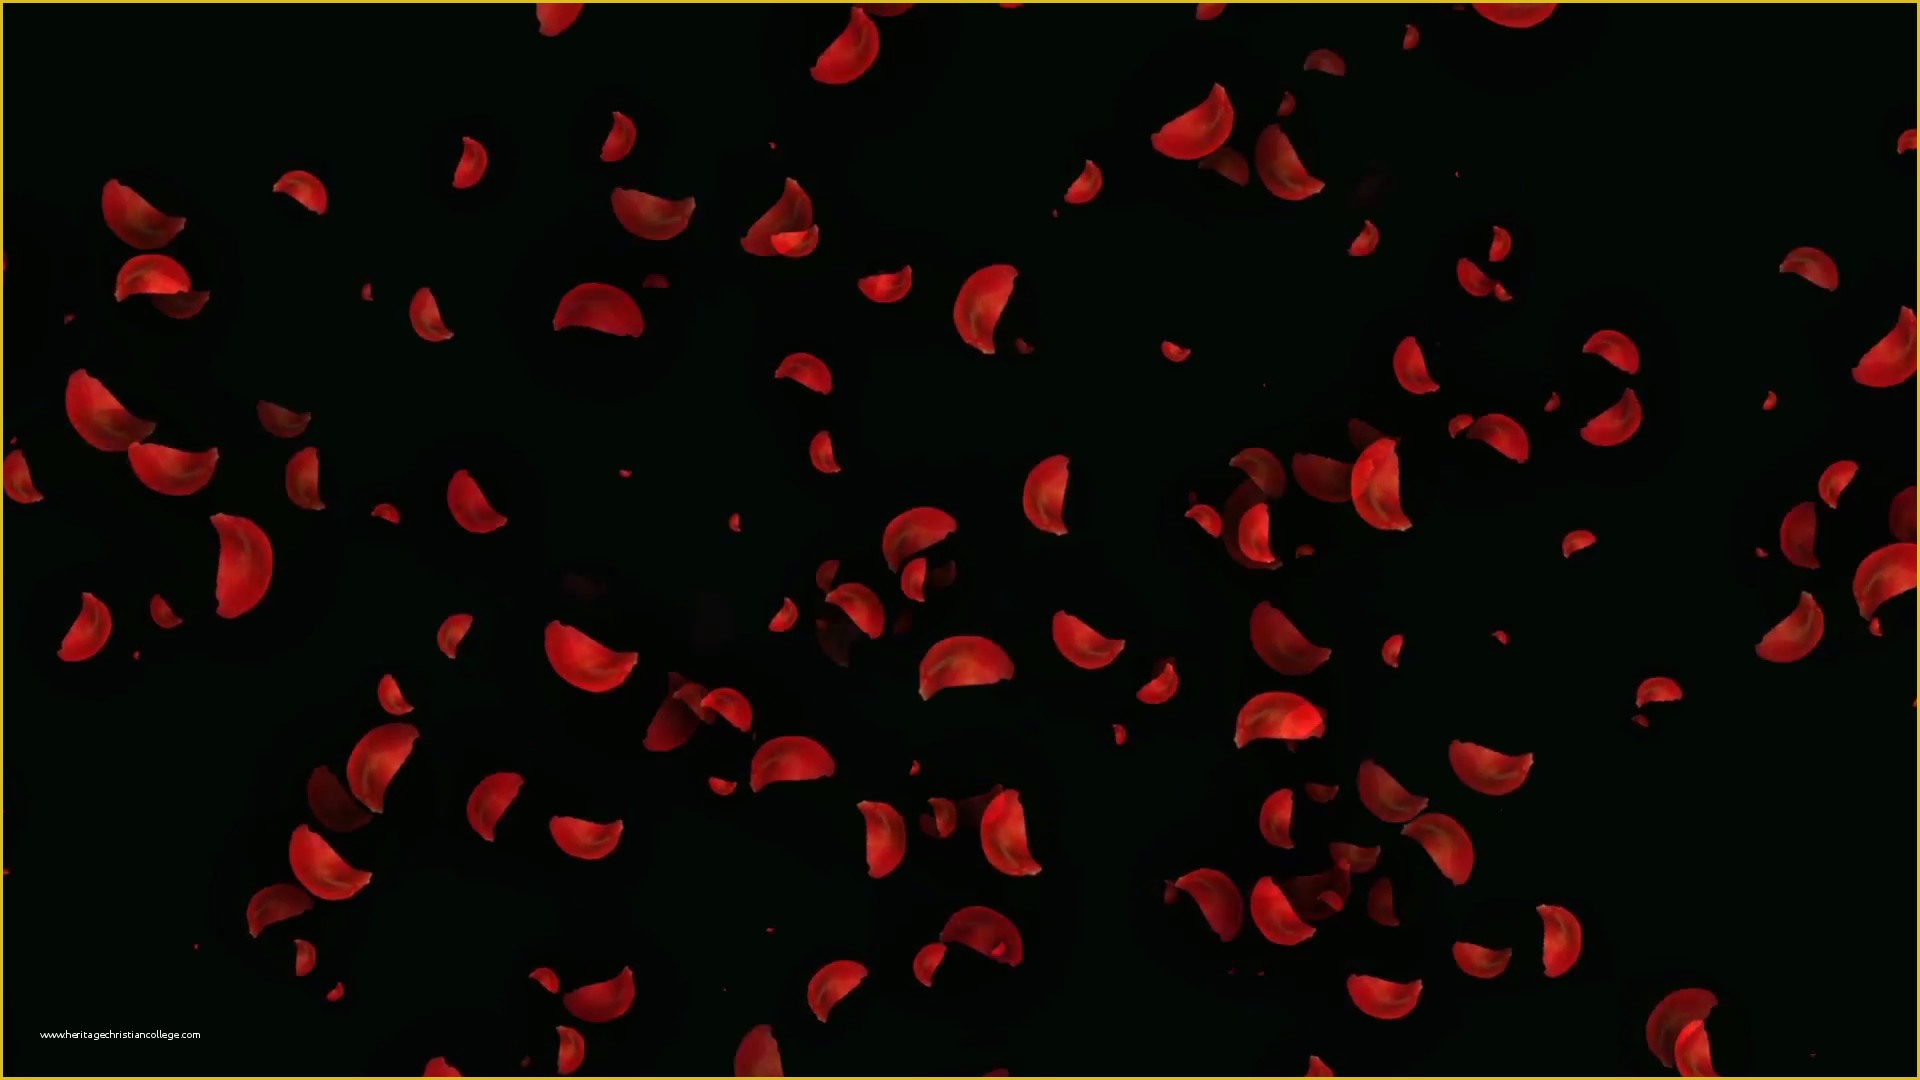 Falling Flower Petals after Effects Template Free Of Falling Rose Petals On Black Motion Background